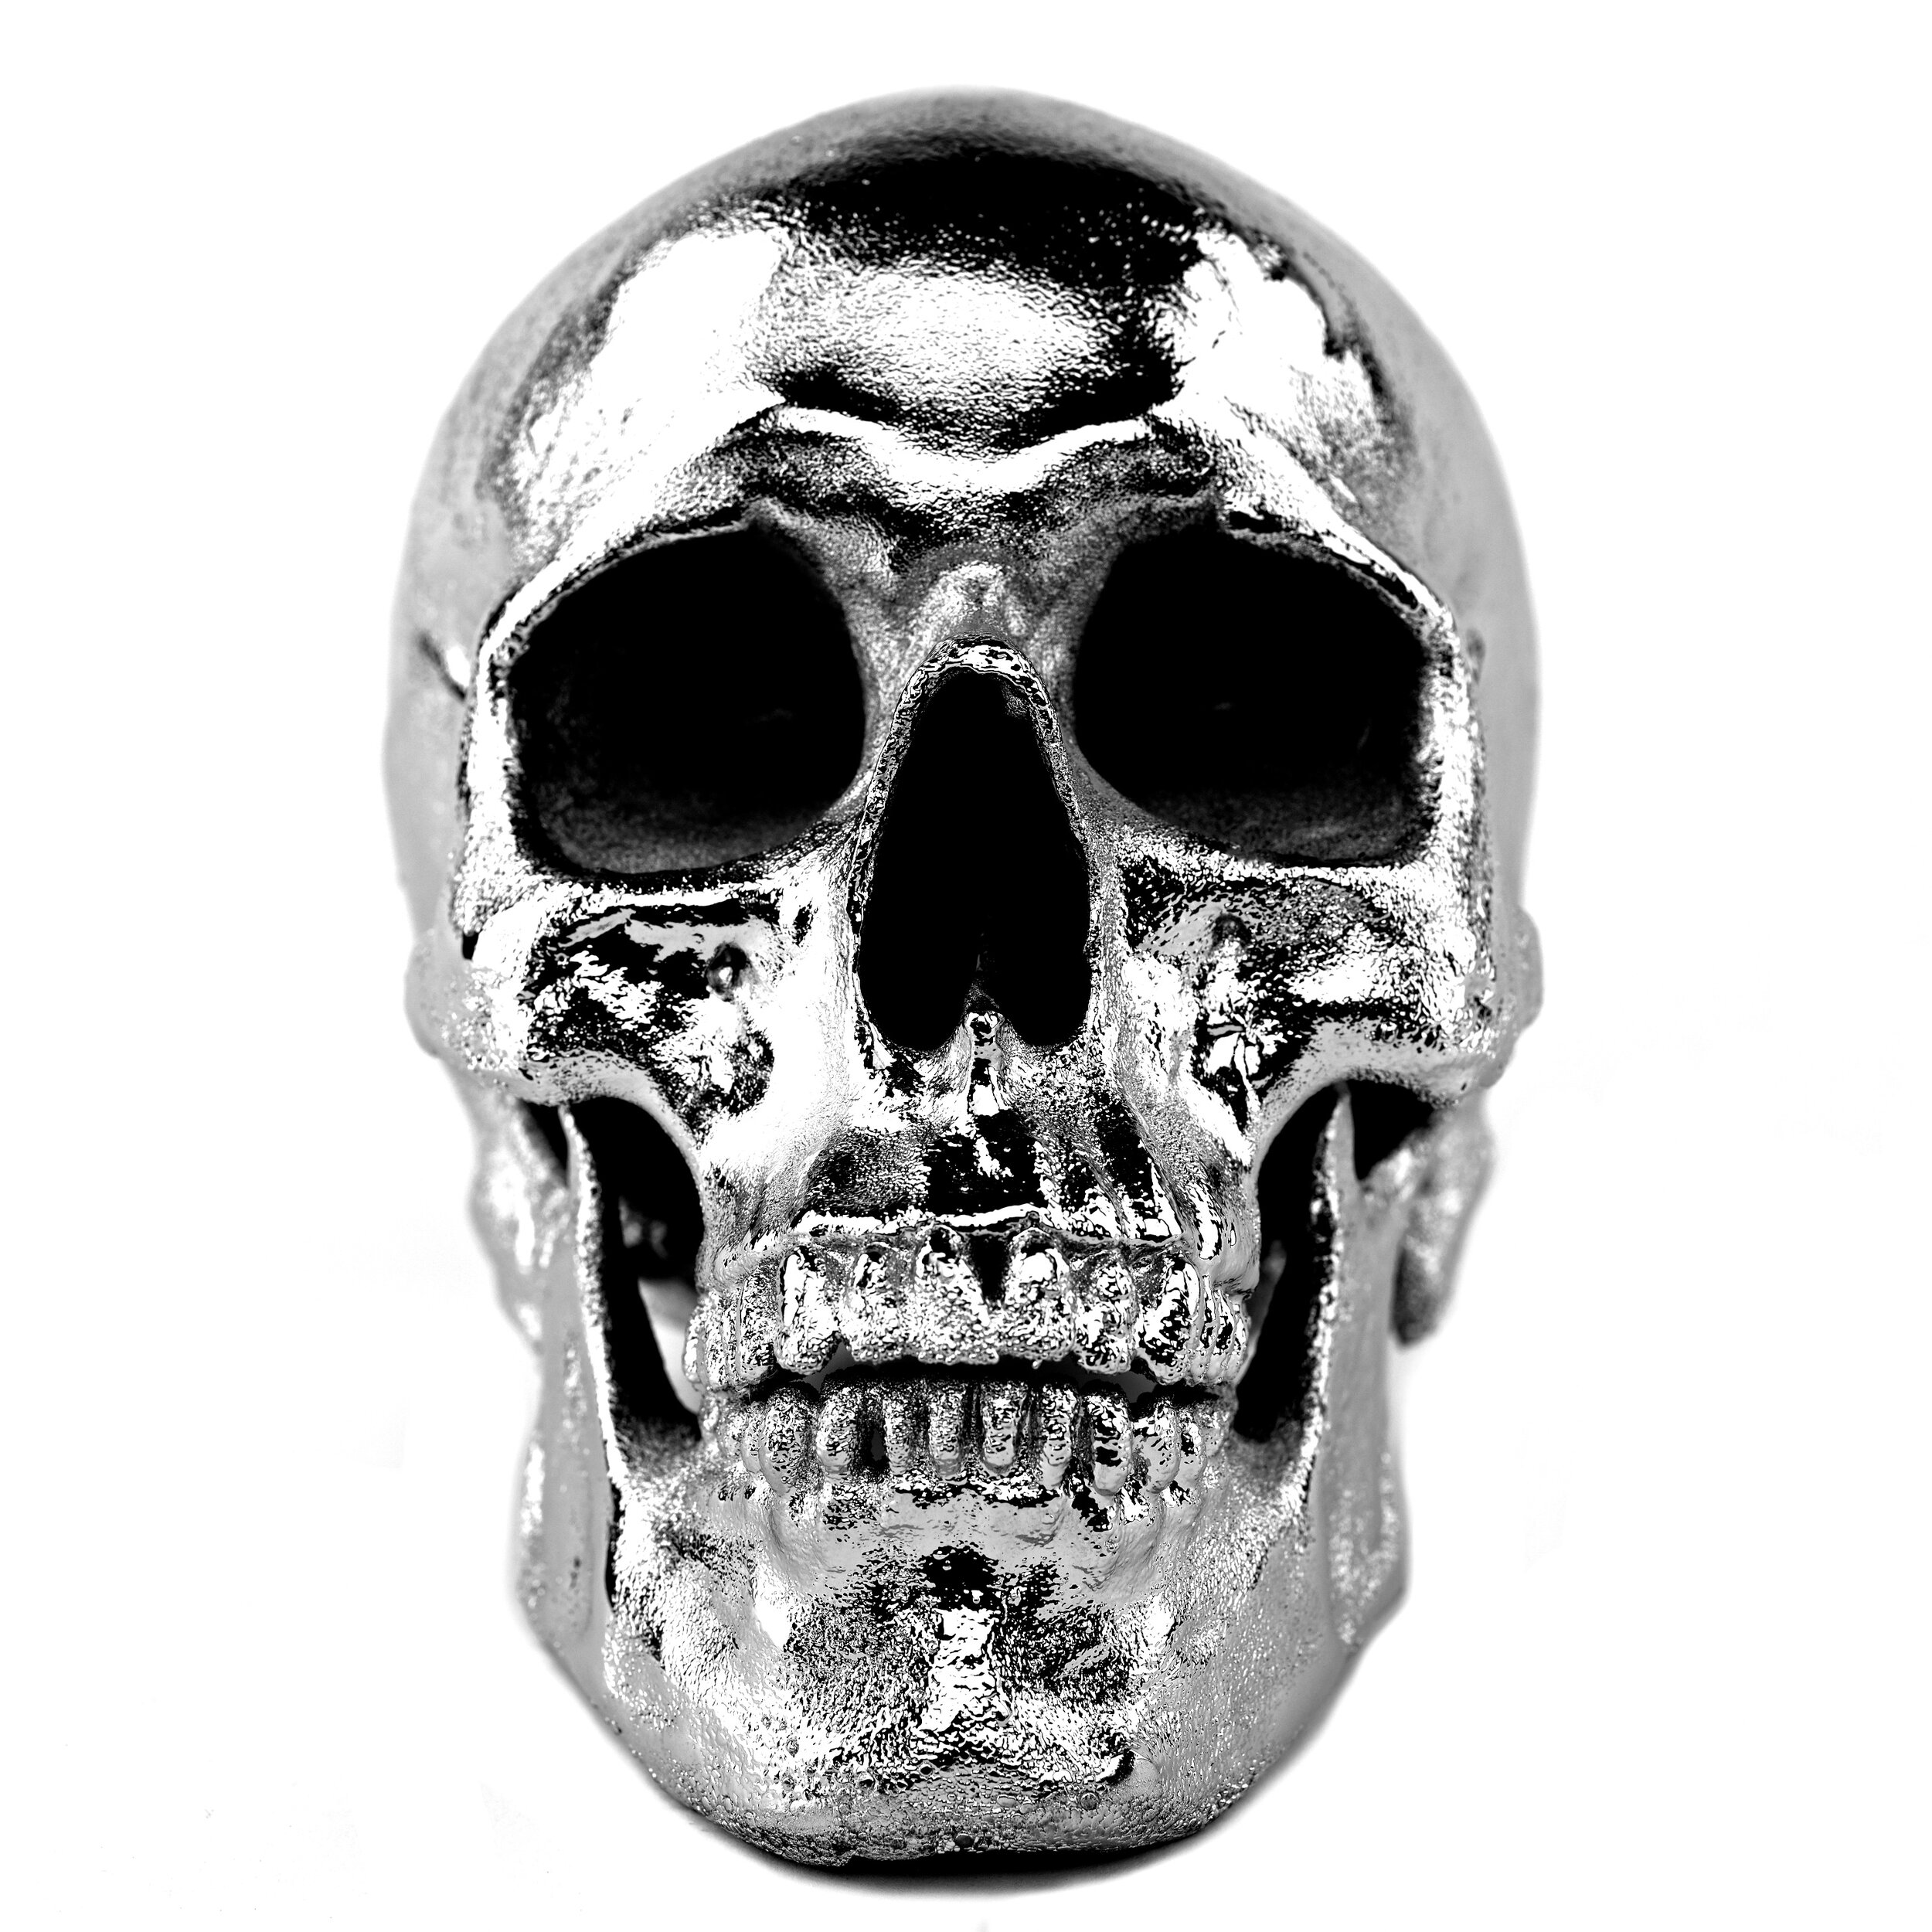  “THE PURITY OF WAR”  NICKEL PLATED HUMAN SKULL   RESIN CAST   